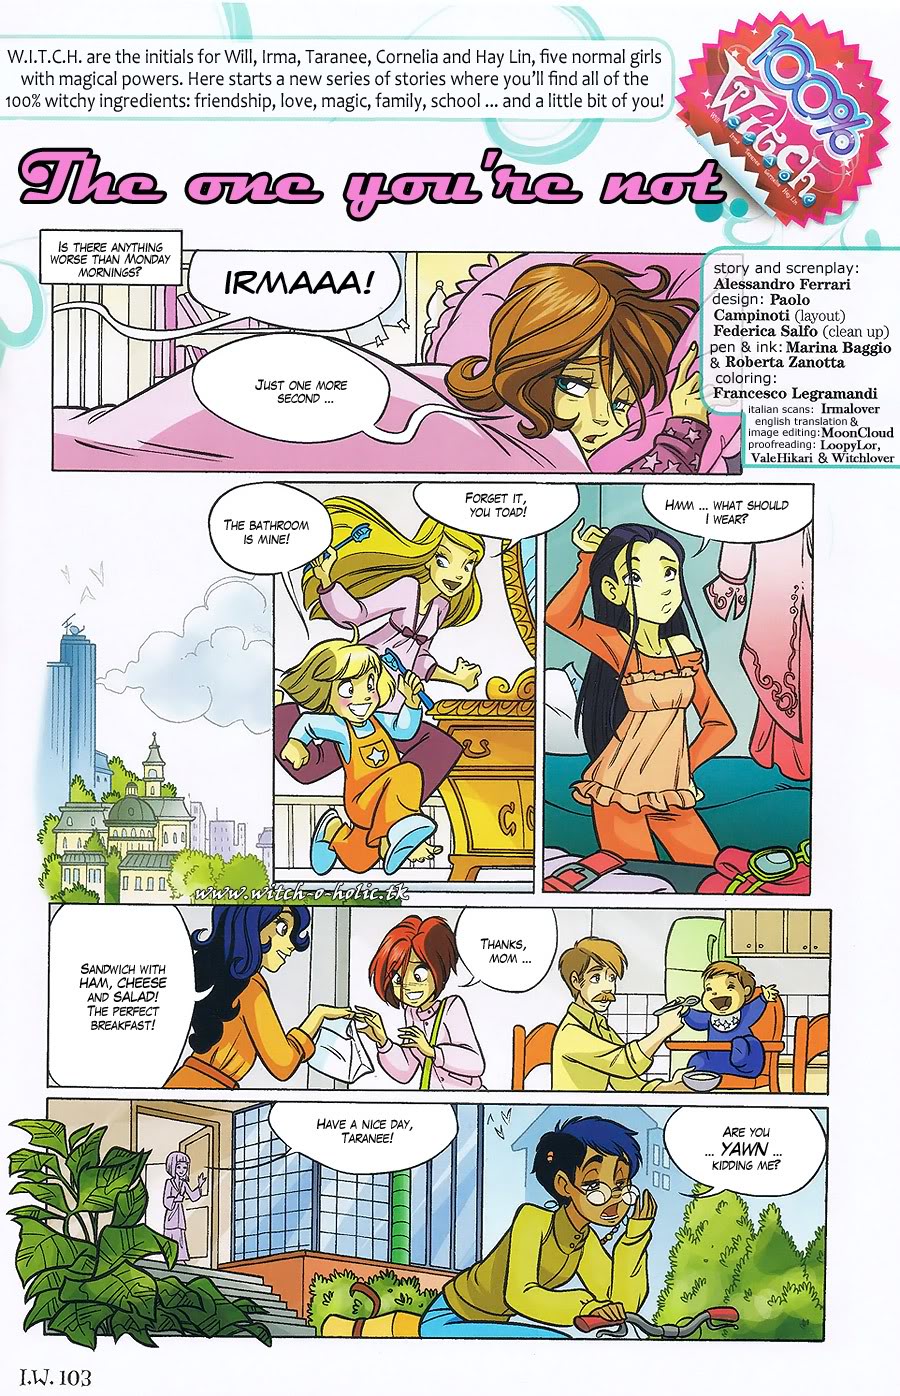 Read online W.i.t.c.h. comic -  Issue #103 - 1